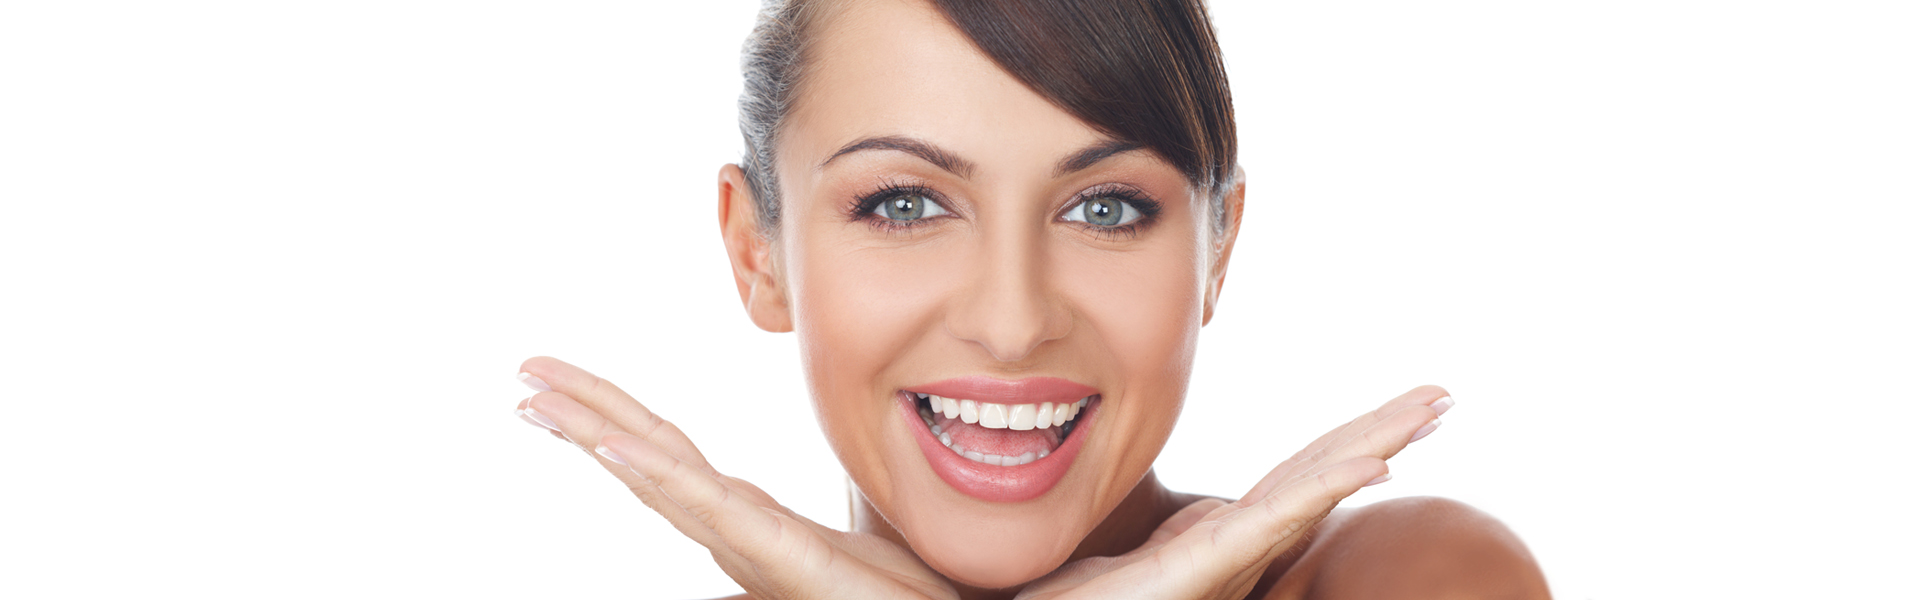 Reasons To Go To A Dentist For Teeth Whitening